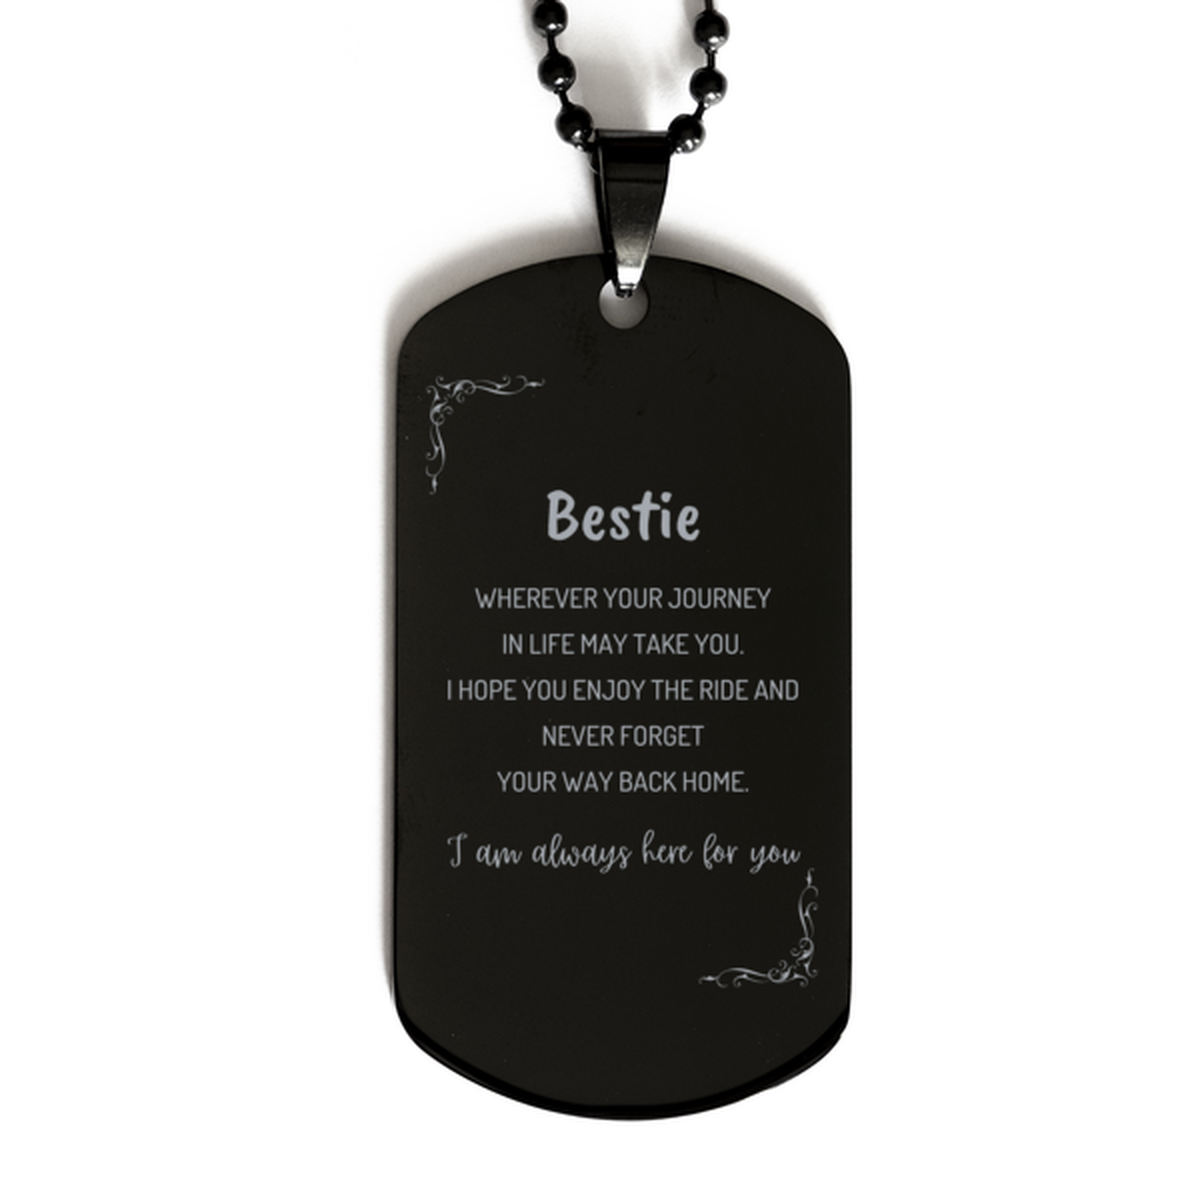 Bestie wherever your journey in life may take you, I am always here for you Bestie Black Dog Tag, Awesome Christmas Gifts For Bestie, Bestie Birthday Gifts for Men Women Family Loved One